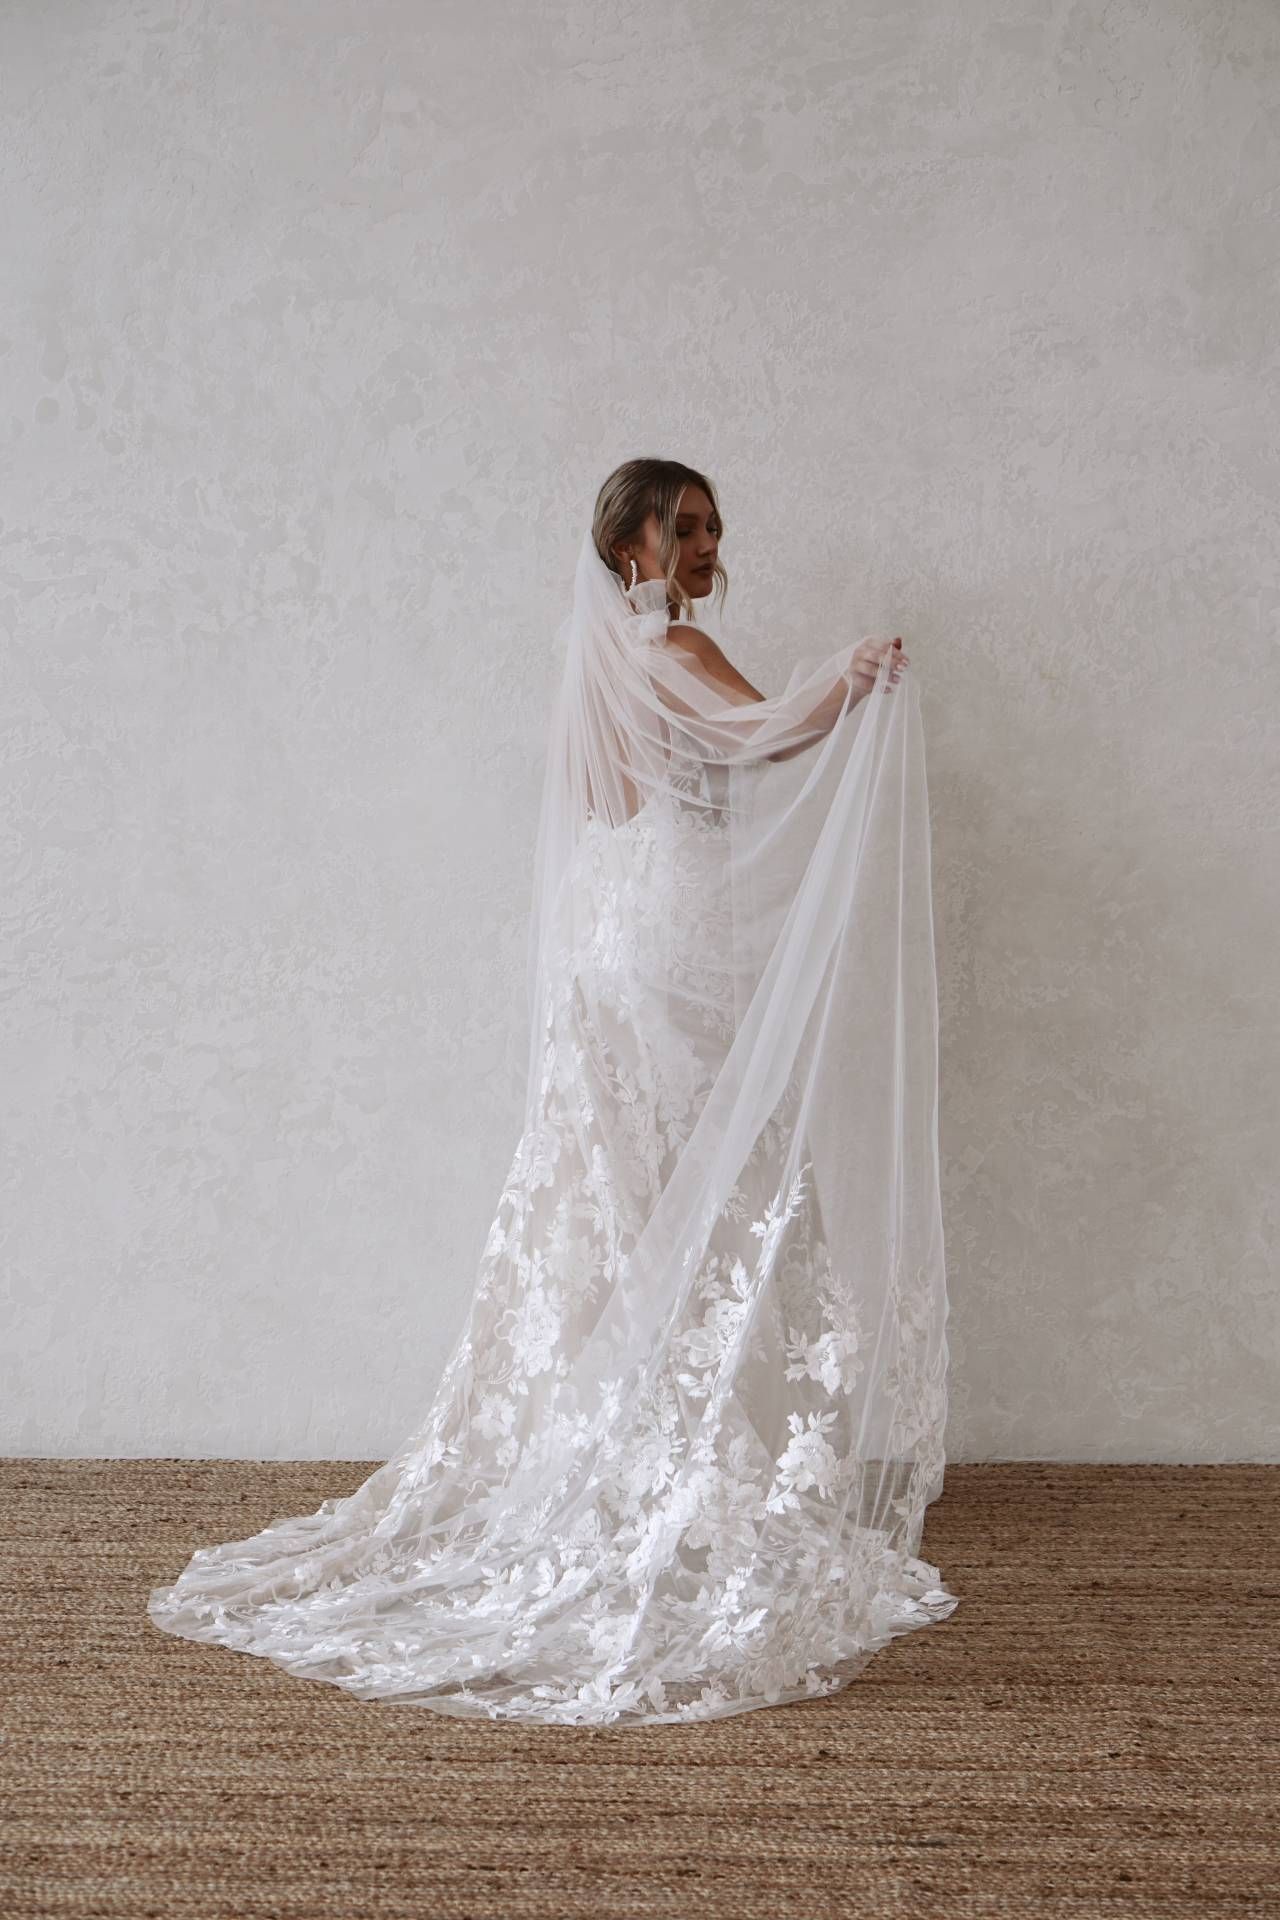 https://www.madewithlovebridal.com/finding-your-veil/photo-19-7-21-7-30-19-pm-1/